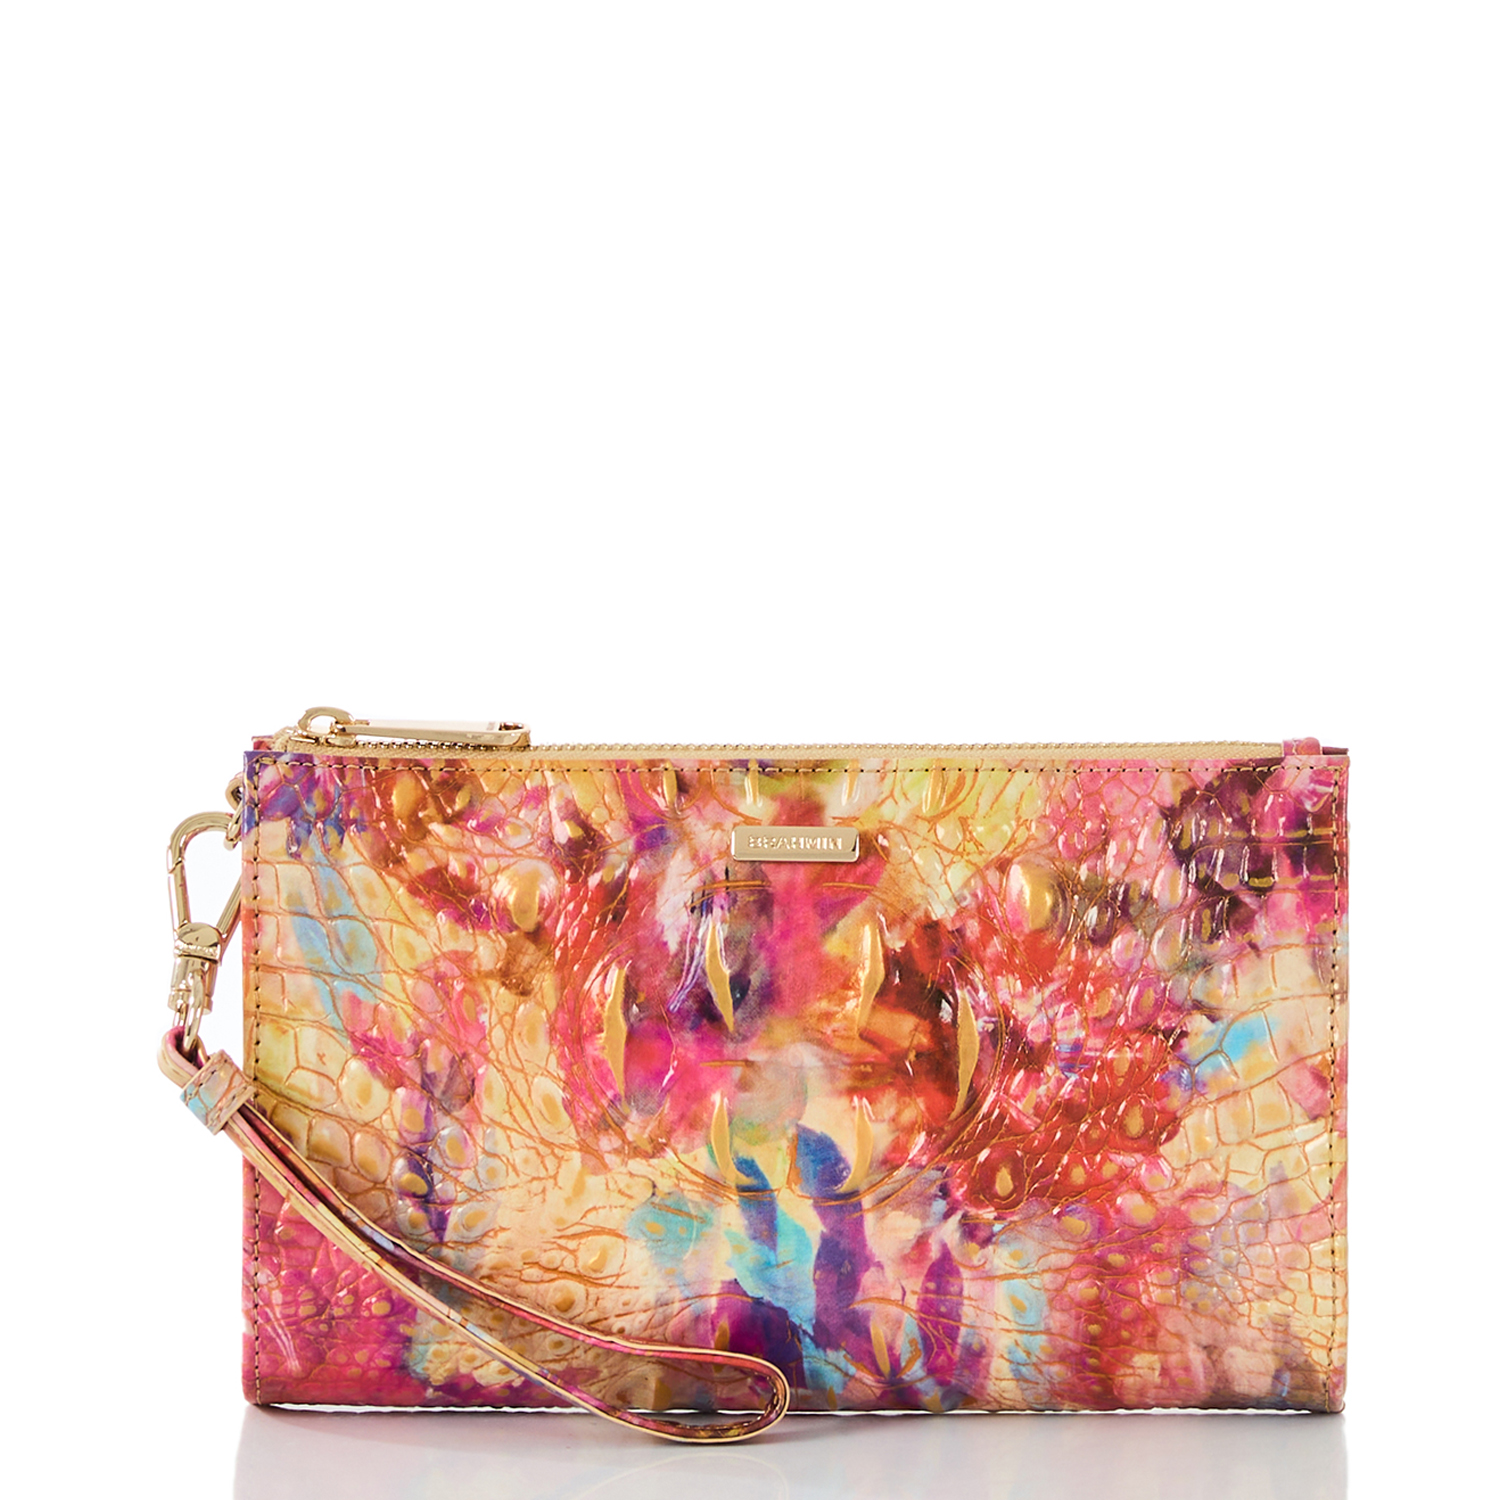 Brahmin Daisy Melbourne Embossed Leather Clutch In Happyhour